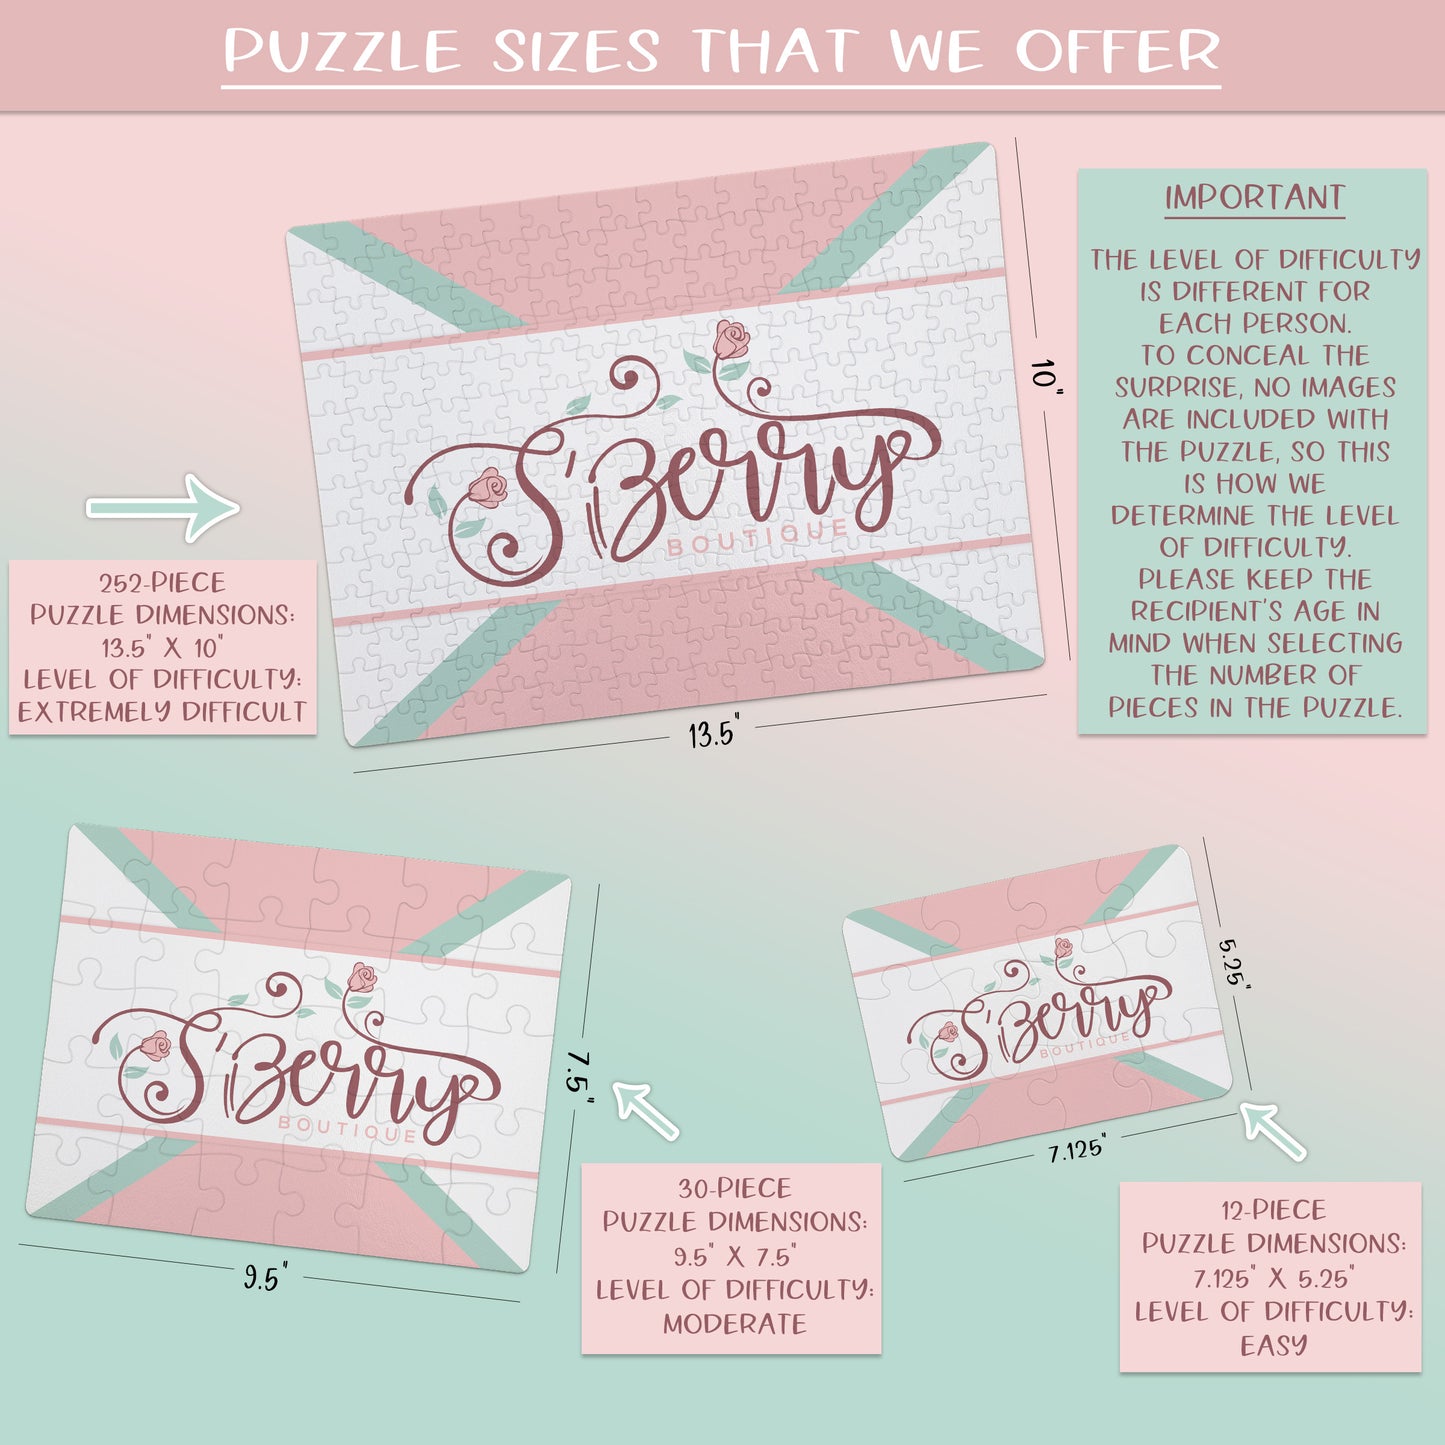 Create Your Own Puzzle - Arrow Design - CYOP0217 | S'Berry Boutique